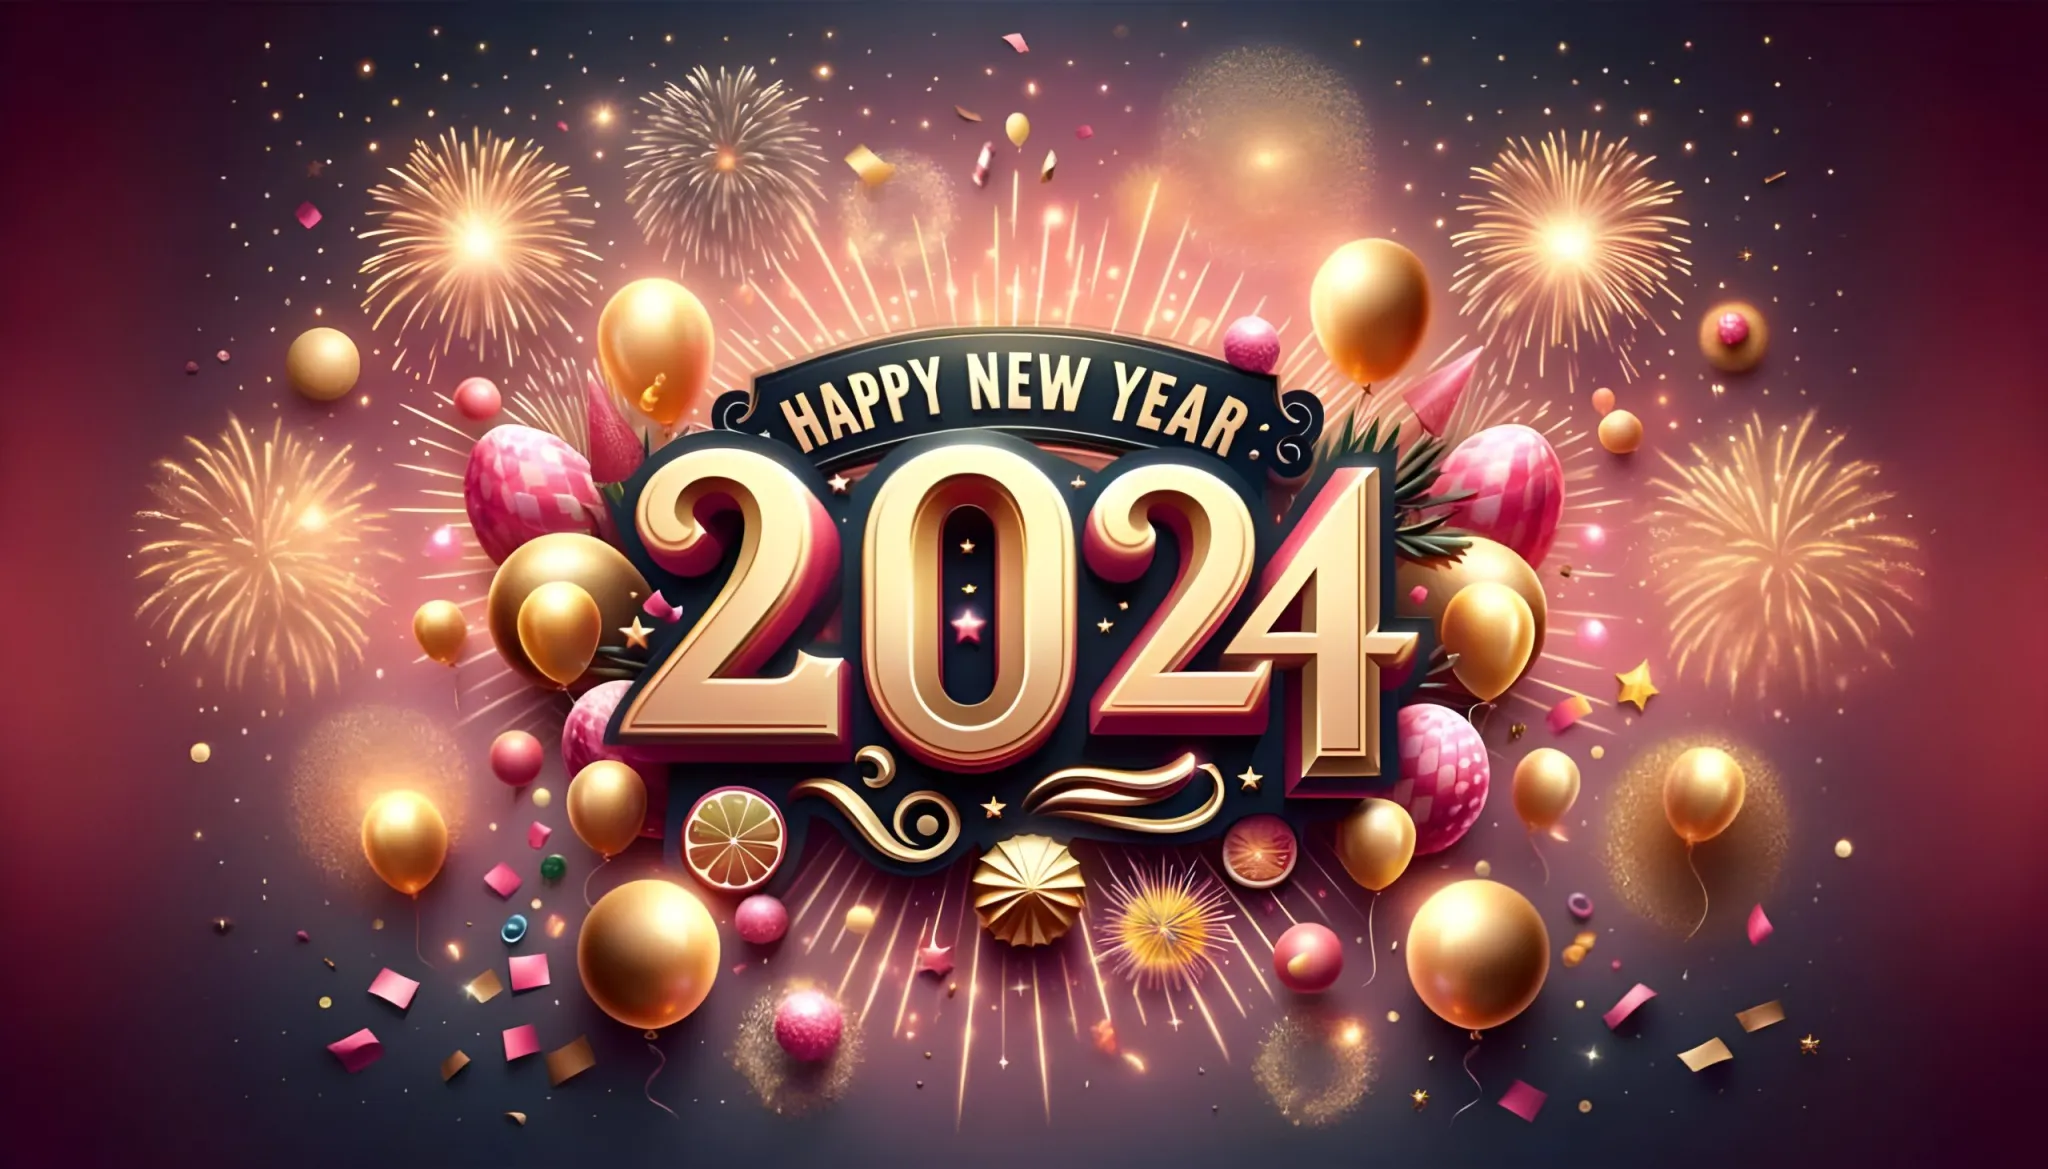 Happy New Year 2024 Wishes: Share Viral Quotes With Friends